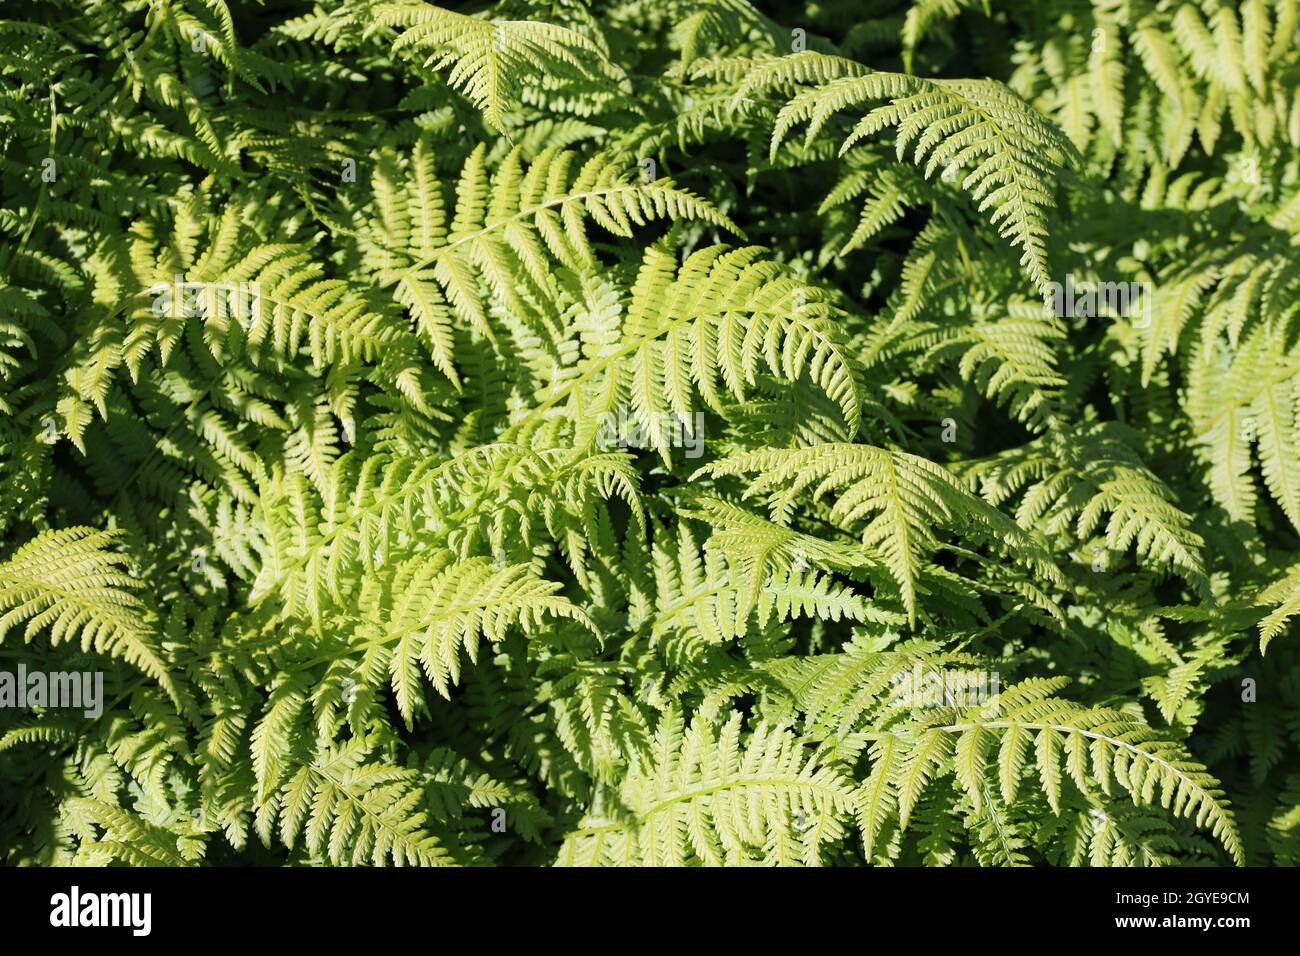 Dwarf lady fern, Athyrium filix femina variety Minutissimum, fronds in bright sunlight with no background but blurred at the edges. Stock Photo